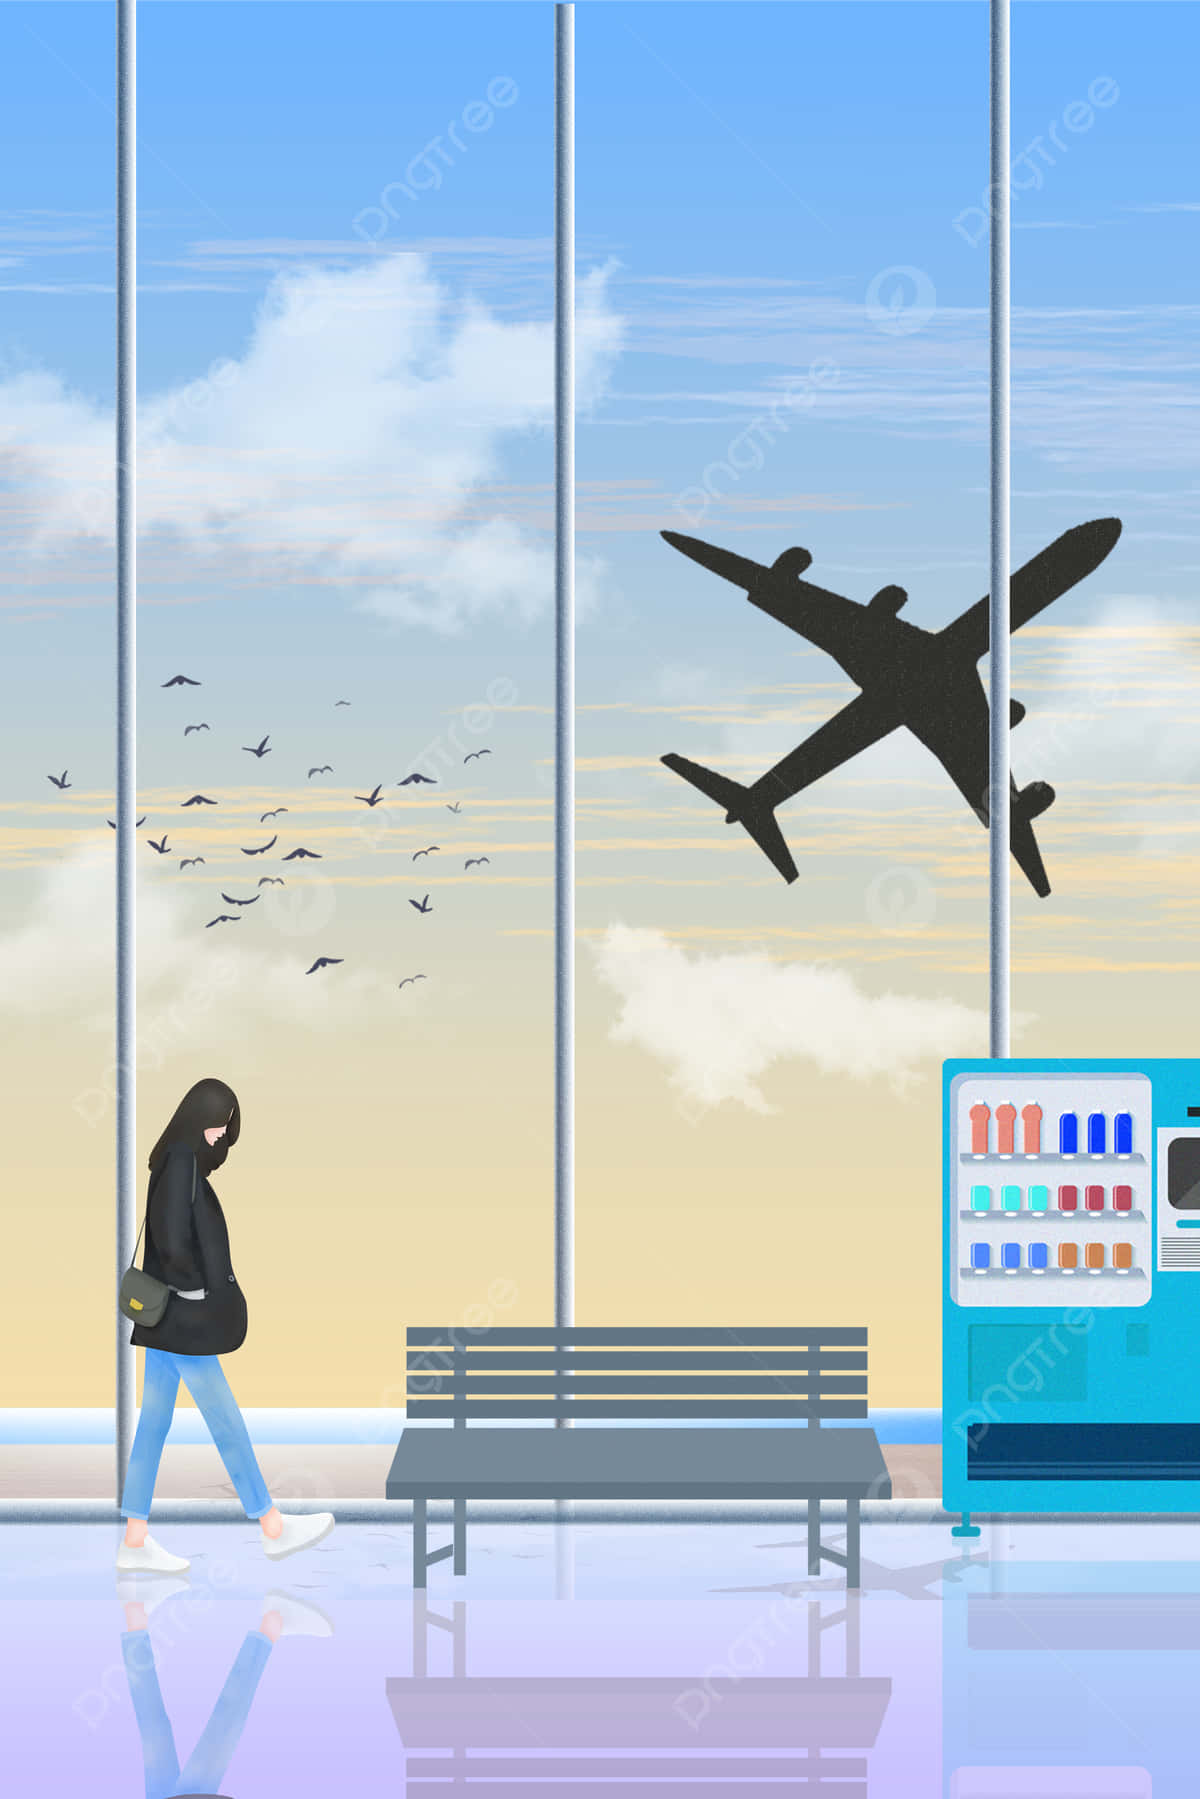 Explore Cities Across the Globe From the Ease and Convenience of the Airport